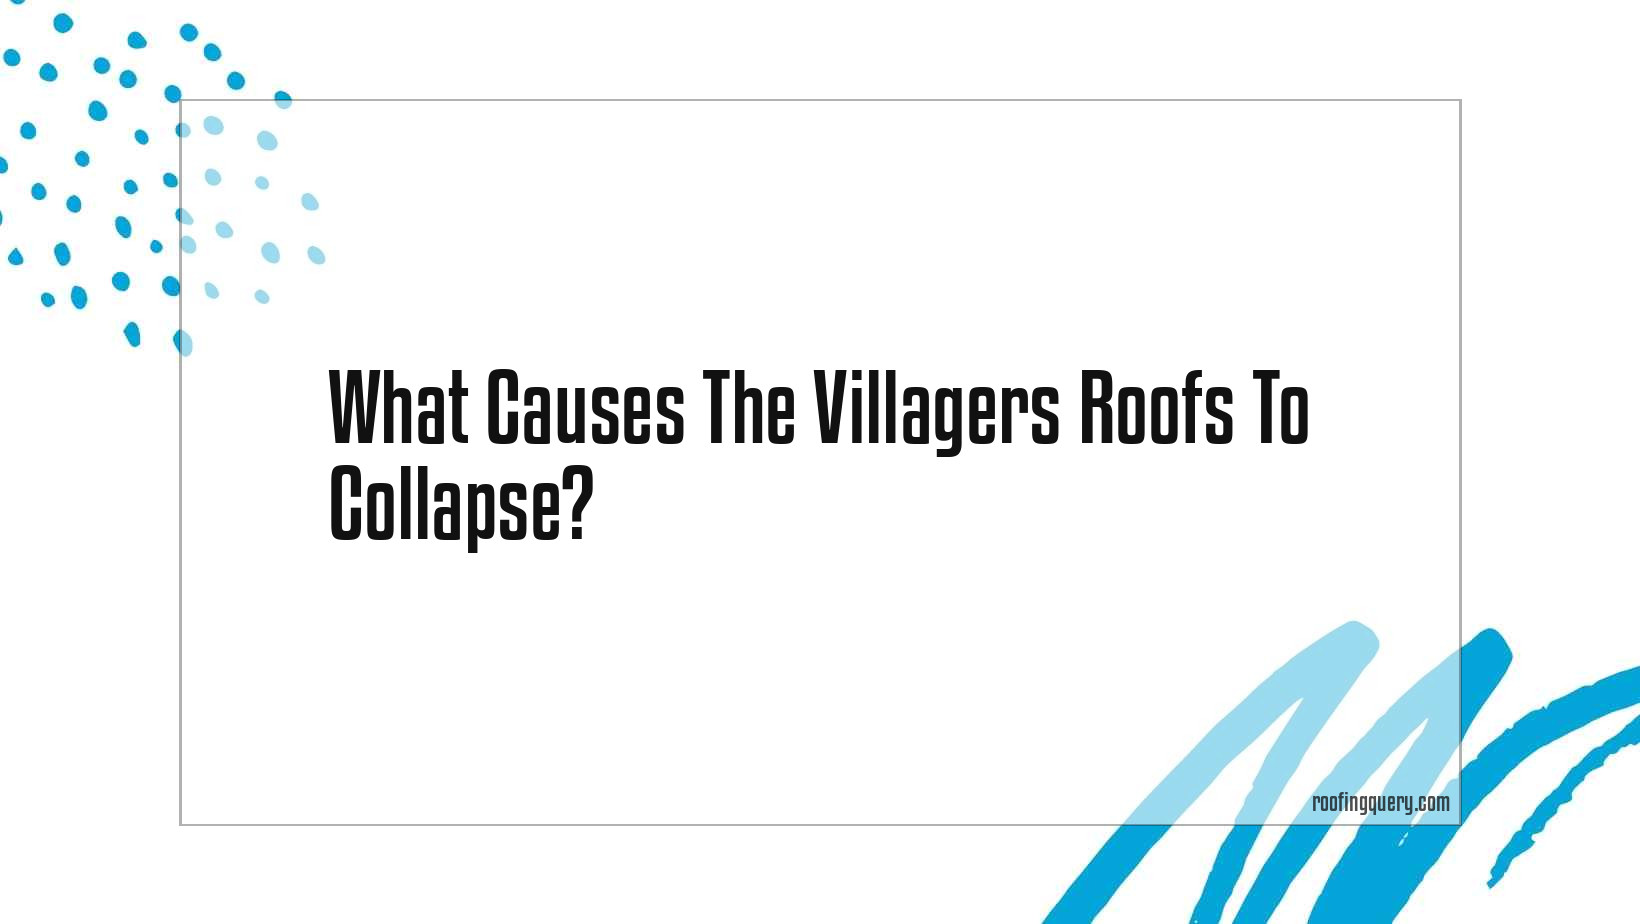 What Causes The Villagers Roofs To Collapse?